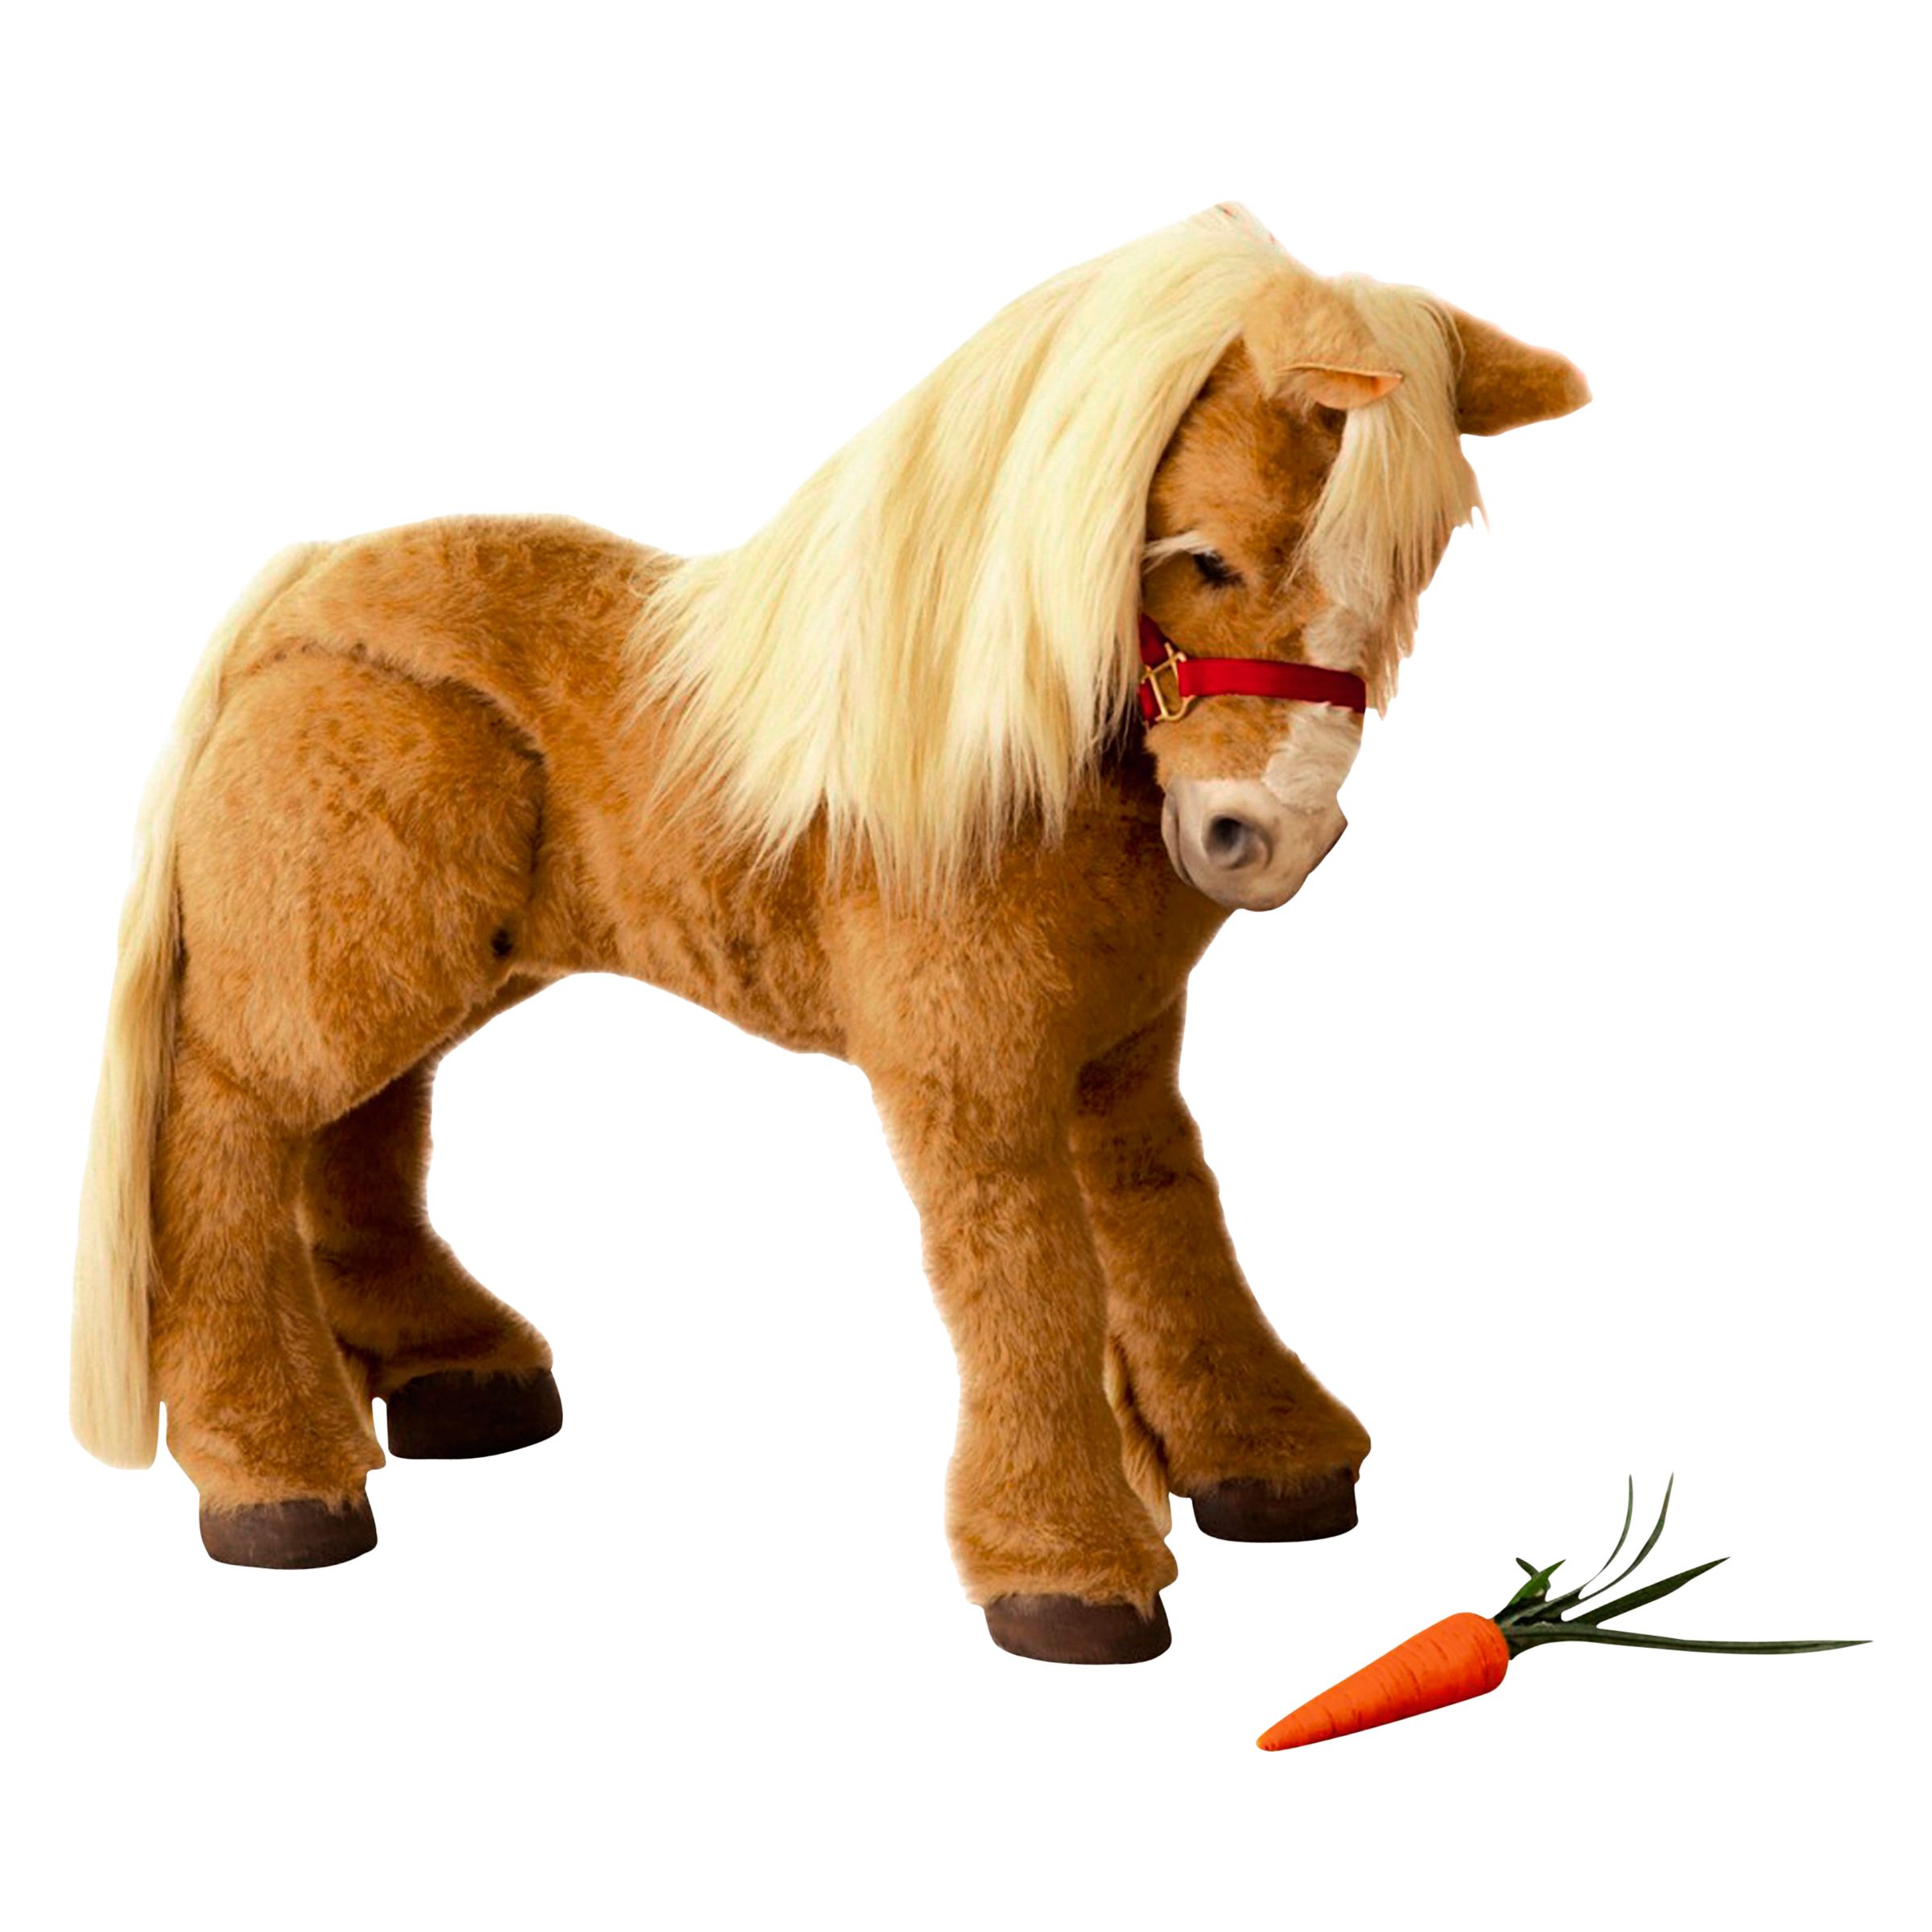 FurReal Friends Butterscotch Pony at JohnLewis